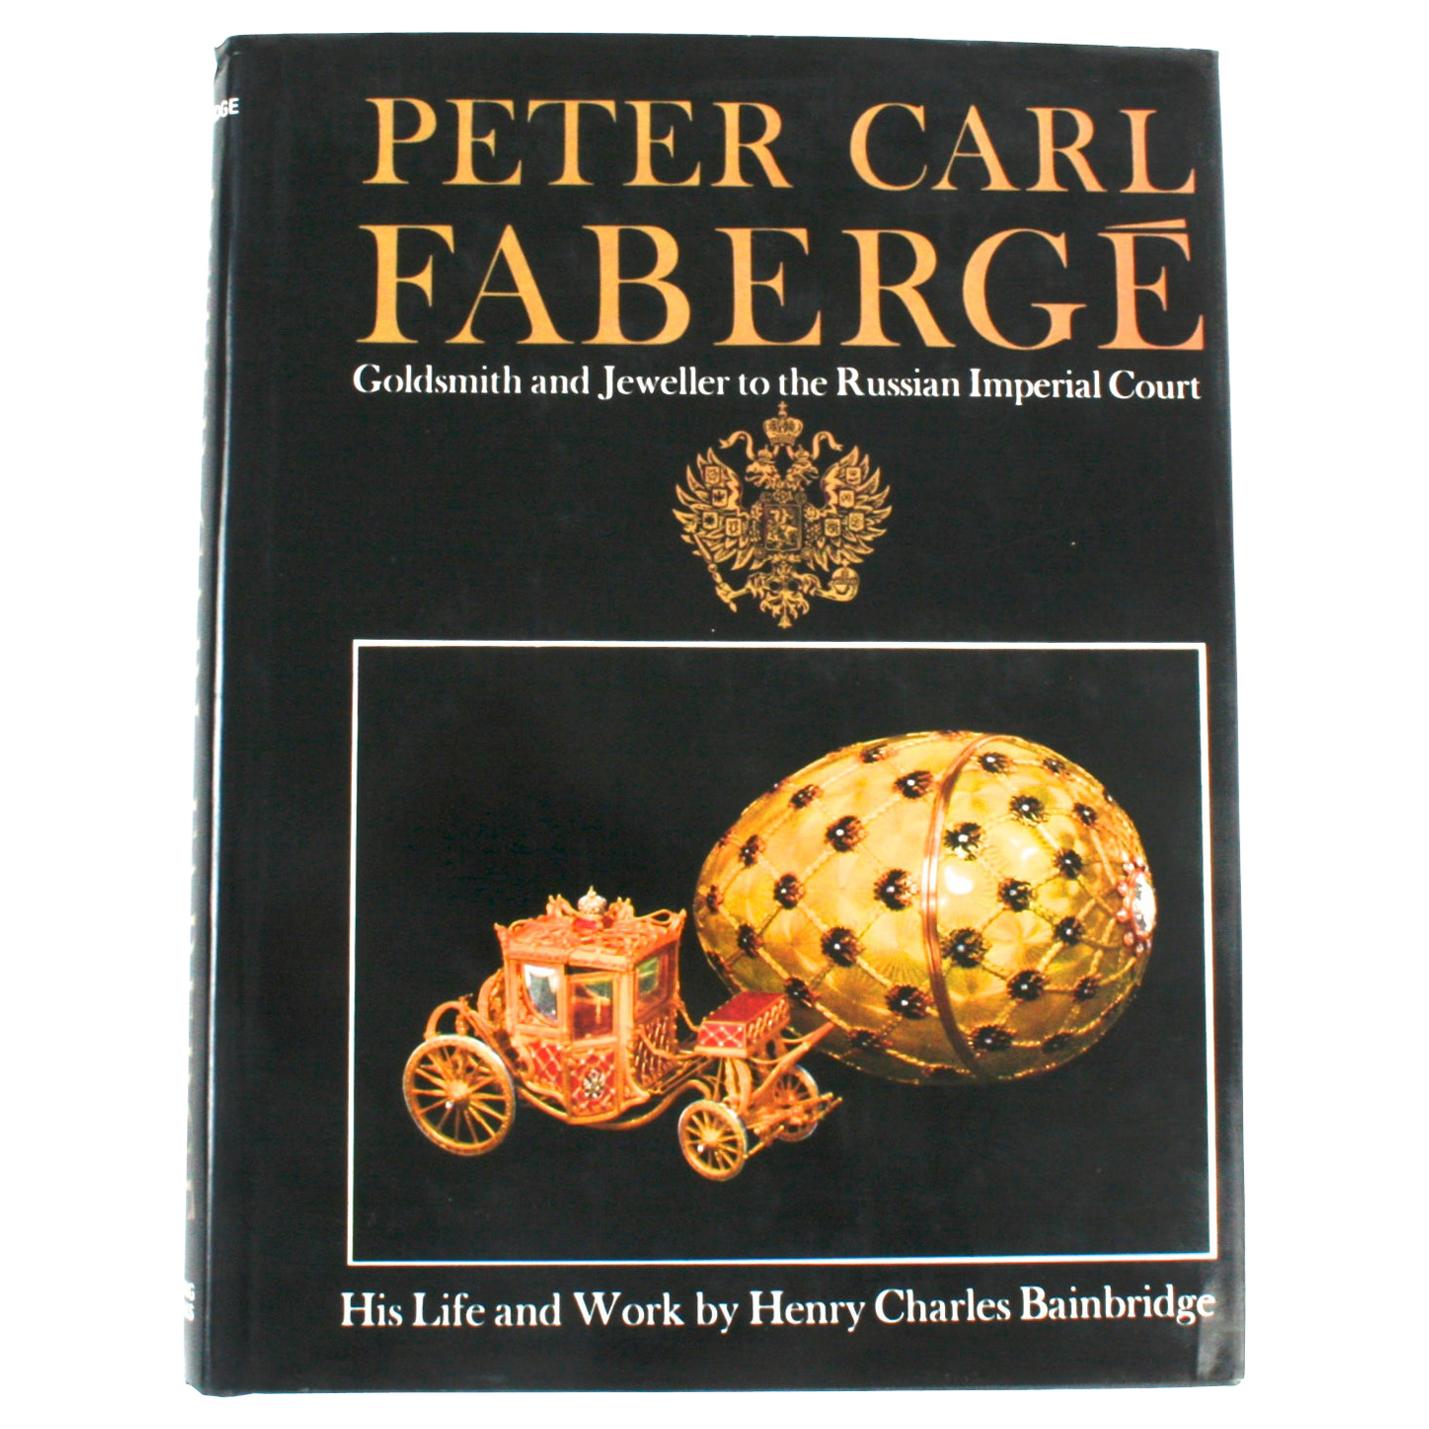 Peter Carl Fabergé, His Life and Work by Henry Charles Bainbridge